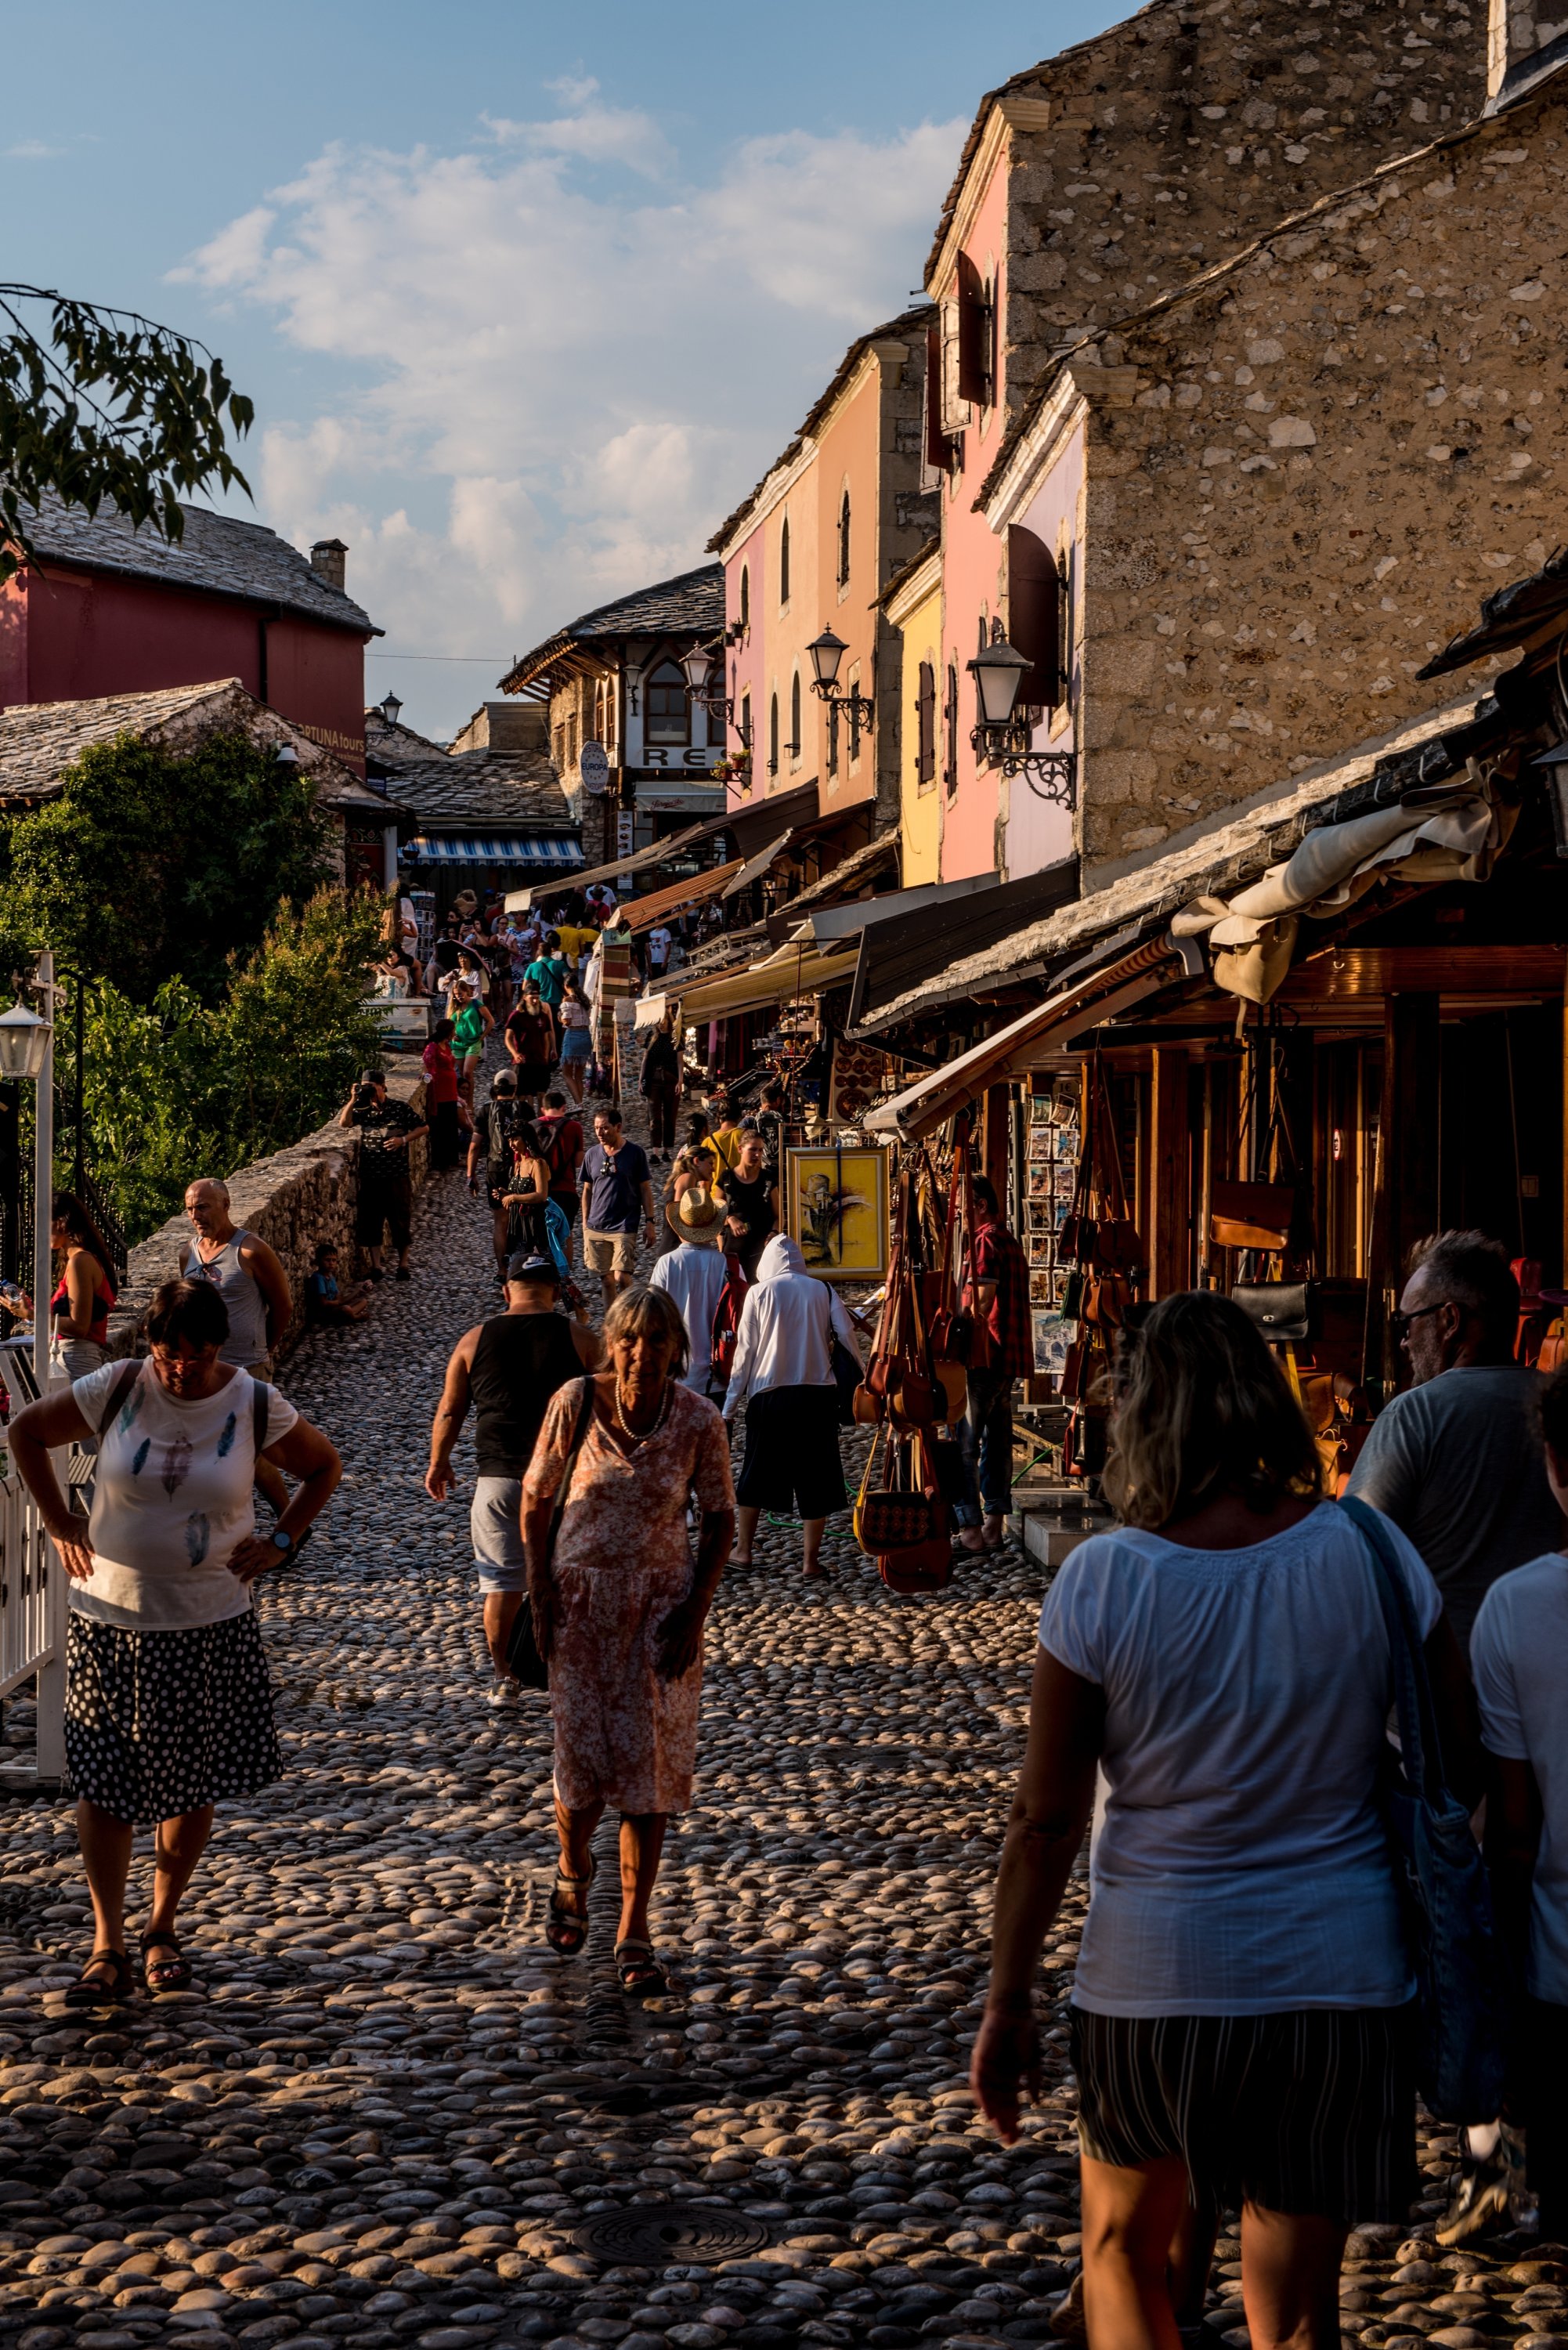 The stone street of Mostar. (Getty Images)